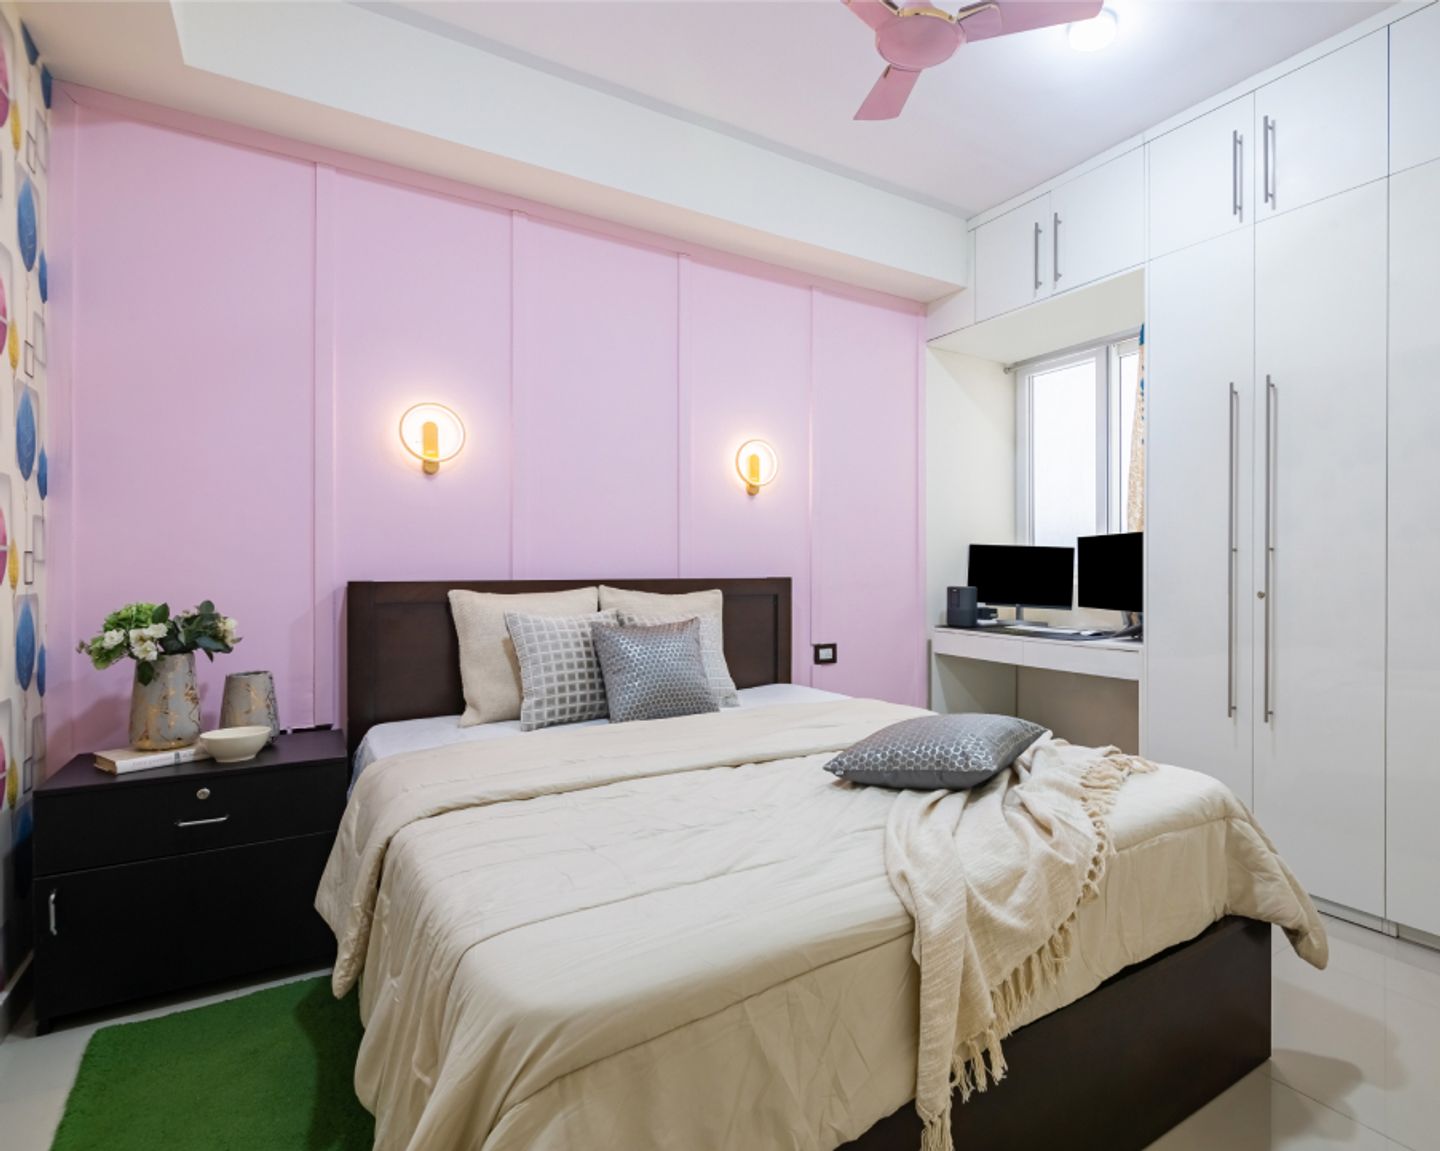 Light Pink Wall Paint Design For Bedrooms - Livspace